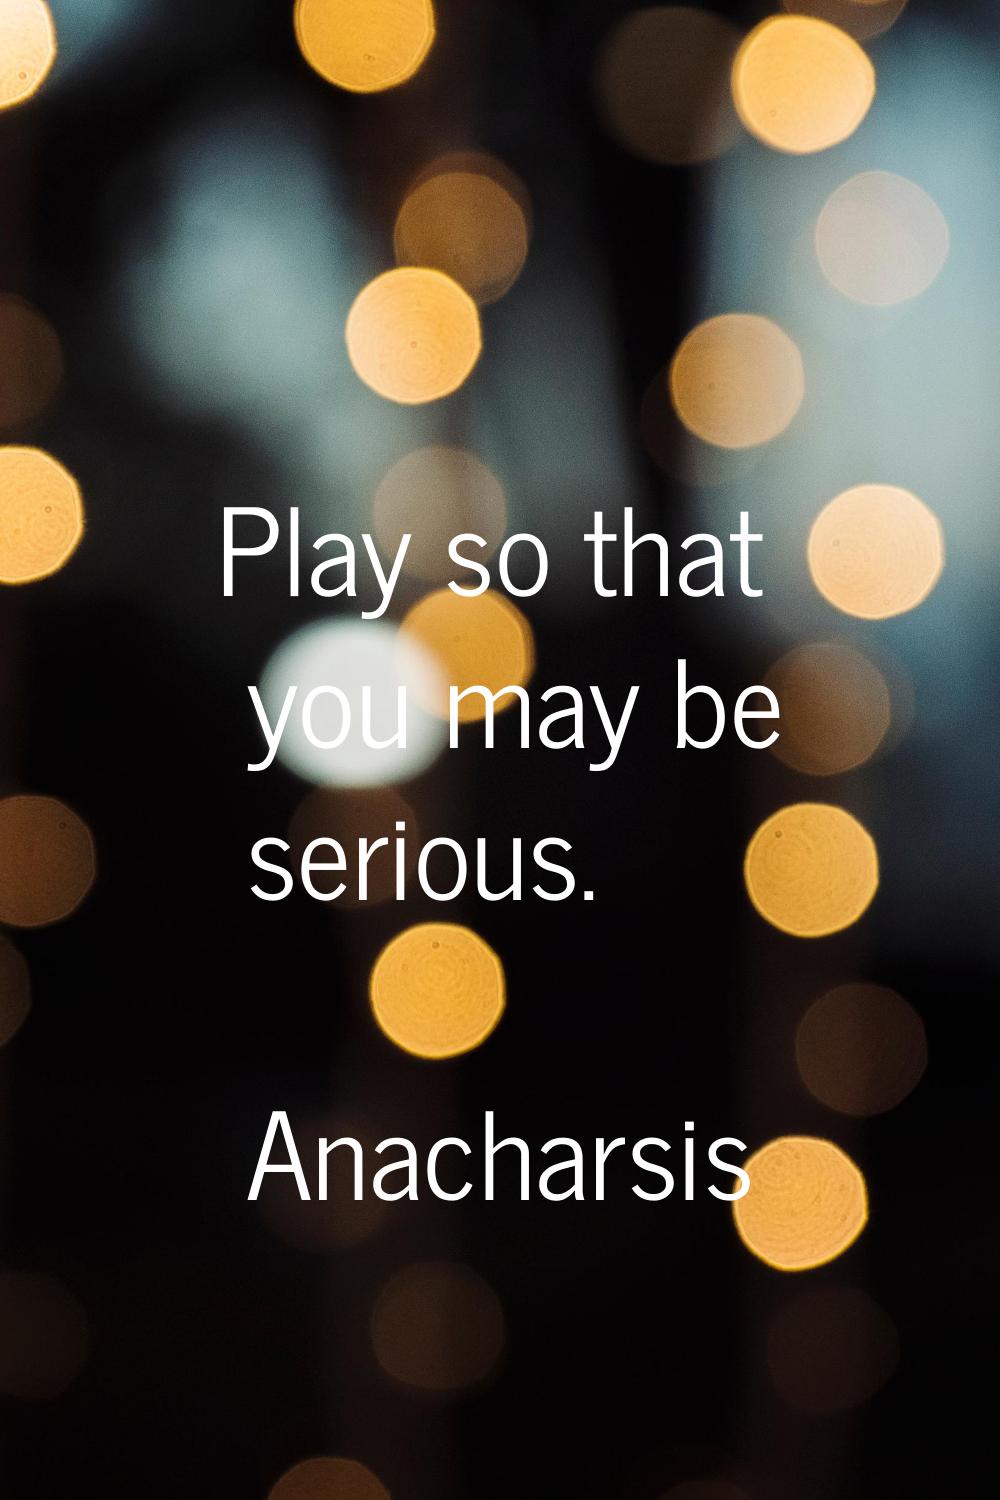 Play so that you may be serious.